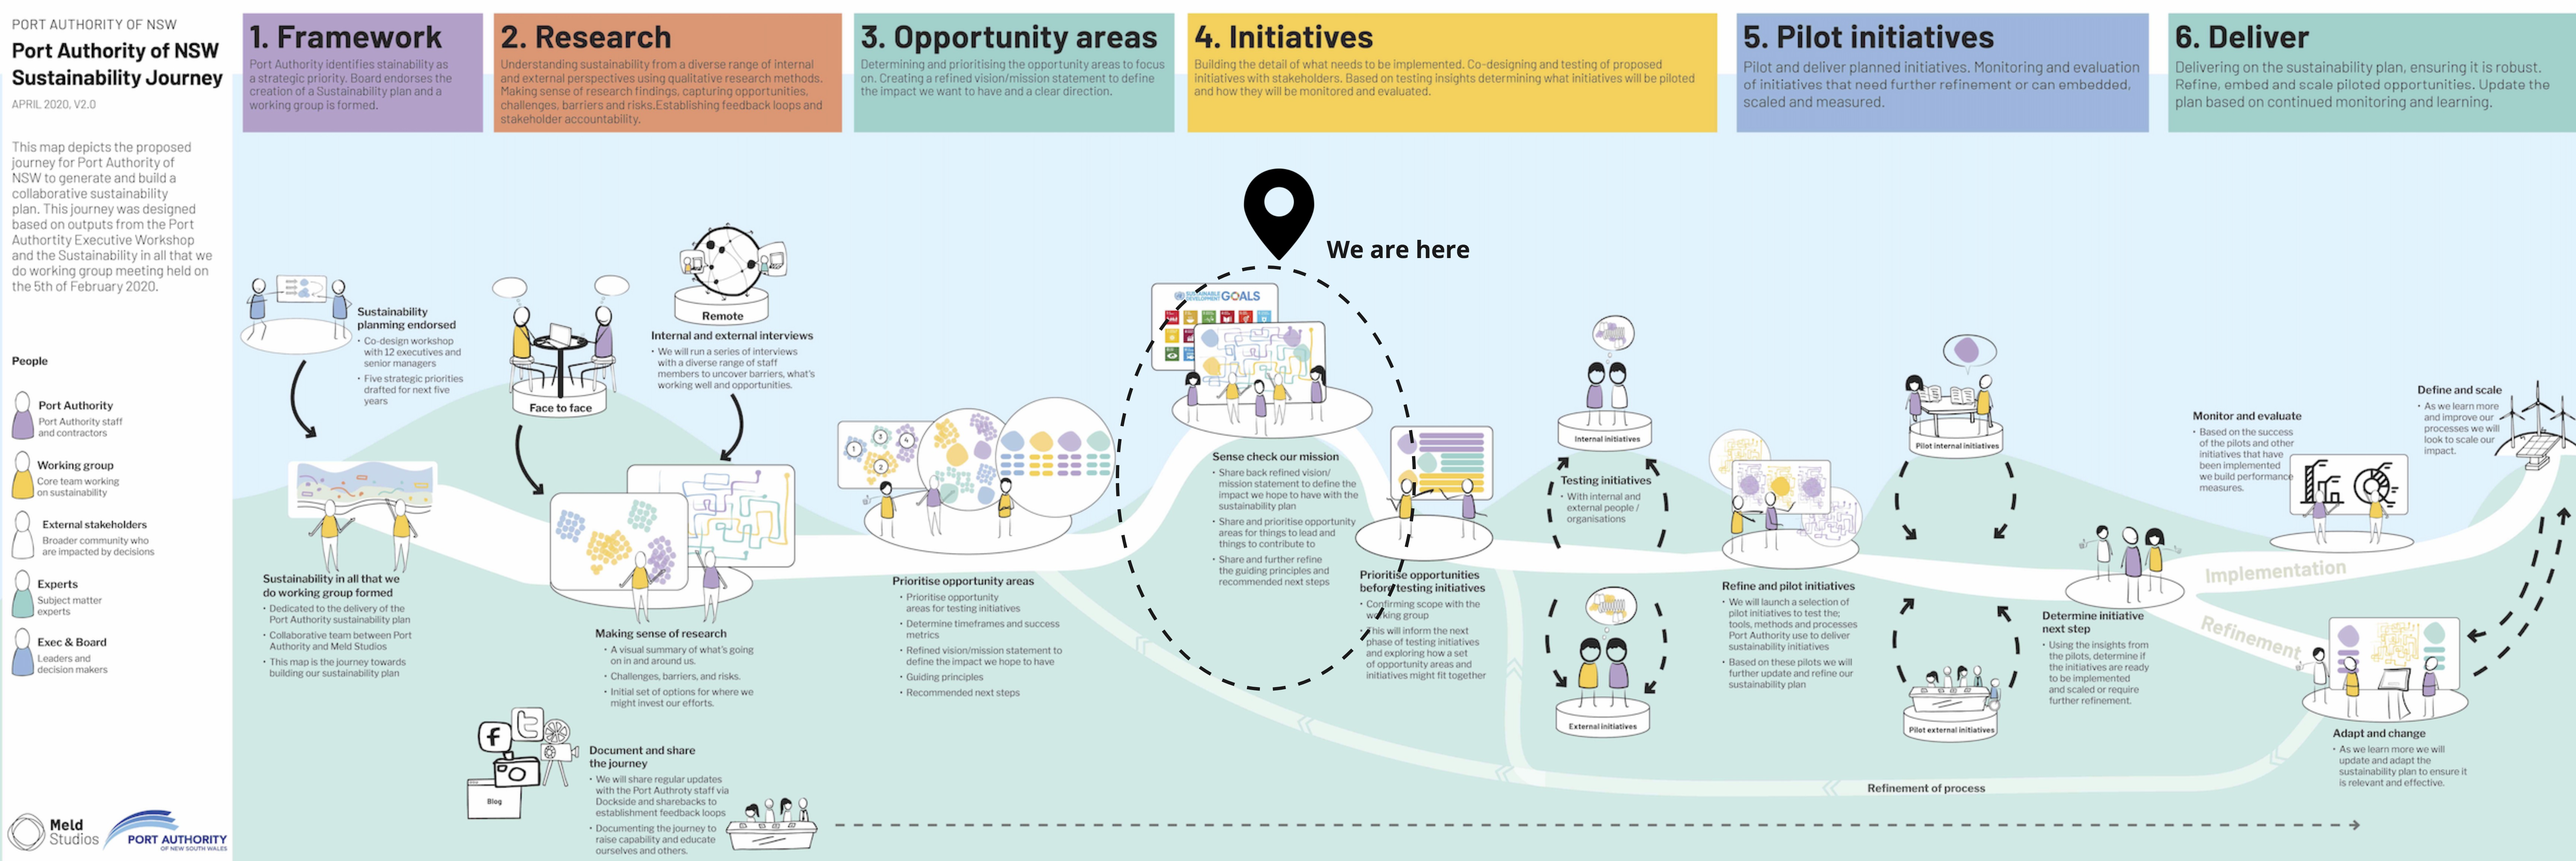 Port Authority Image 1 - Process for stakeholder engagement and codesign of the Sustainability Plan